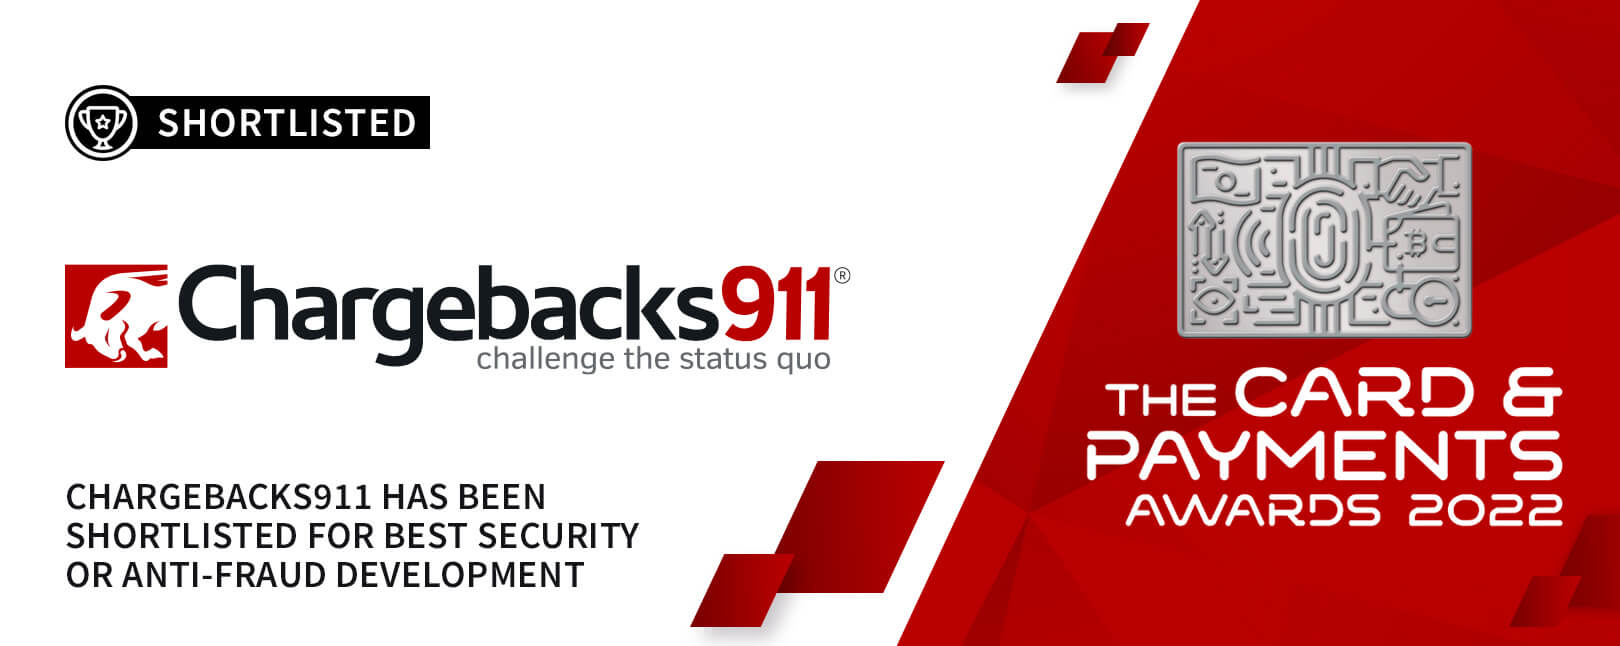 Chargebacks911® shortlisted for the Card & Payments Awards 2023